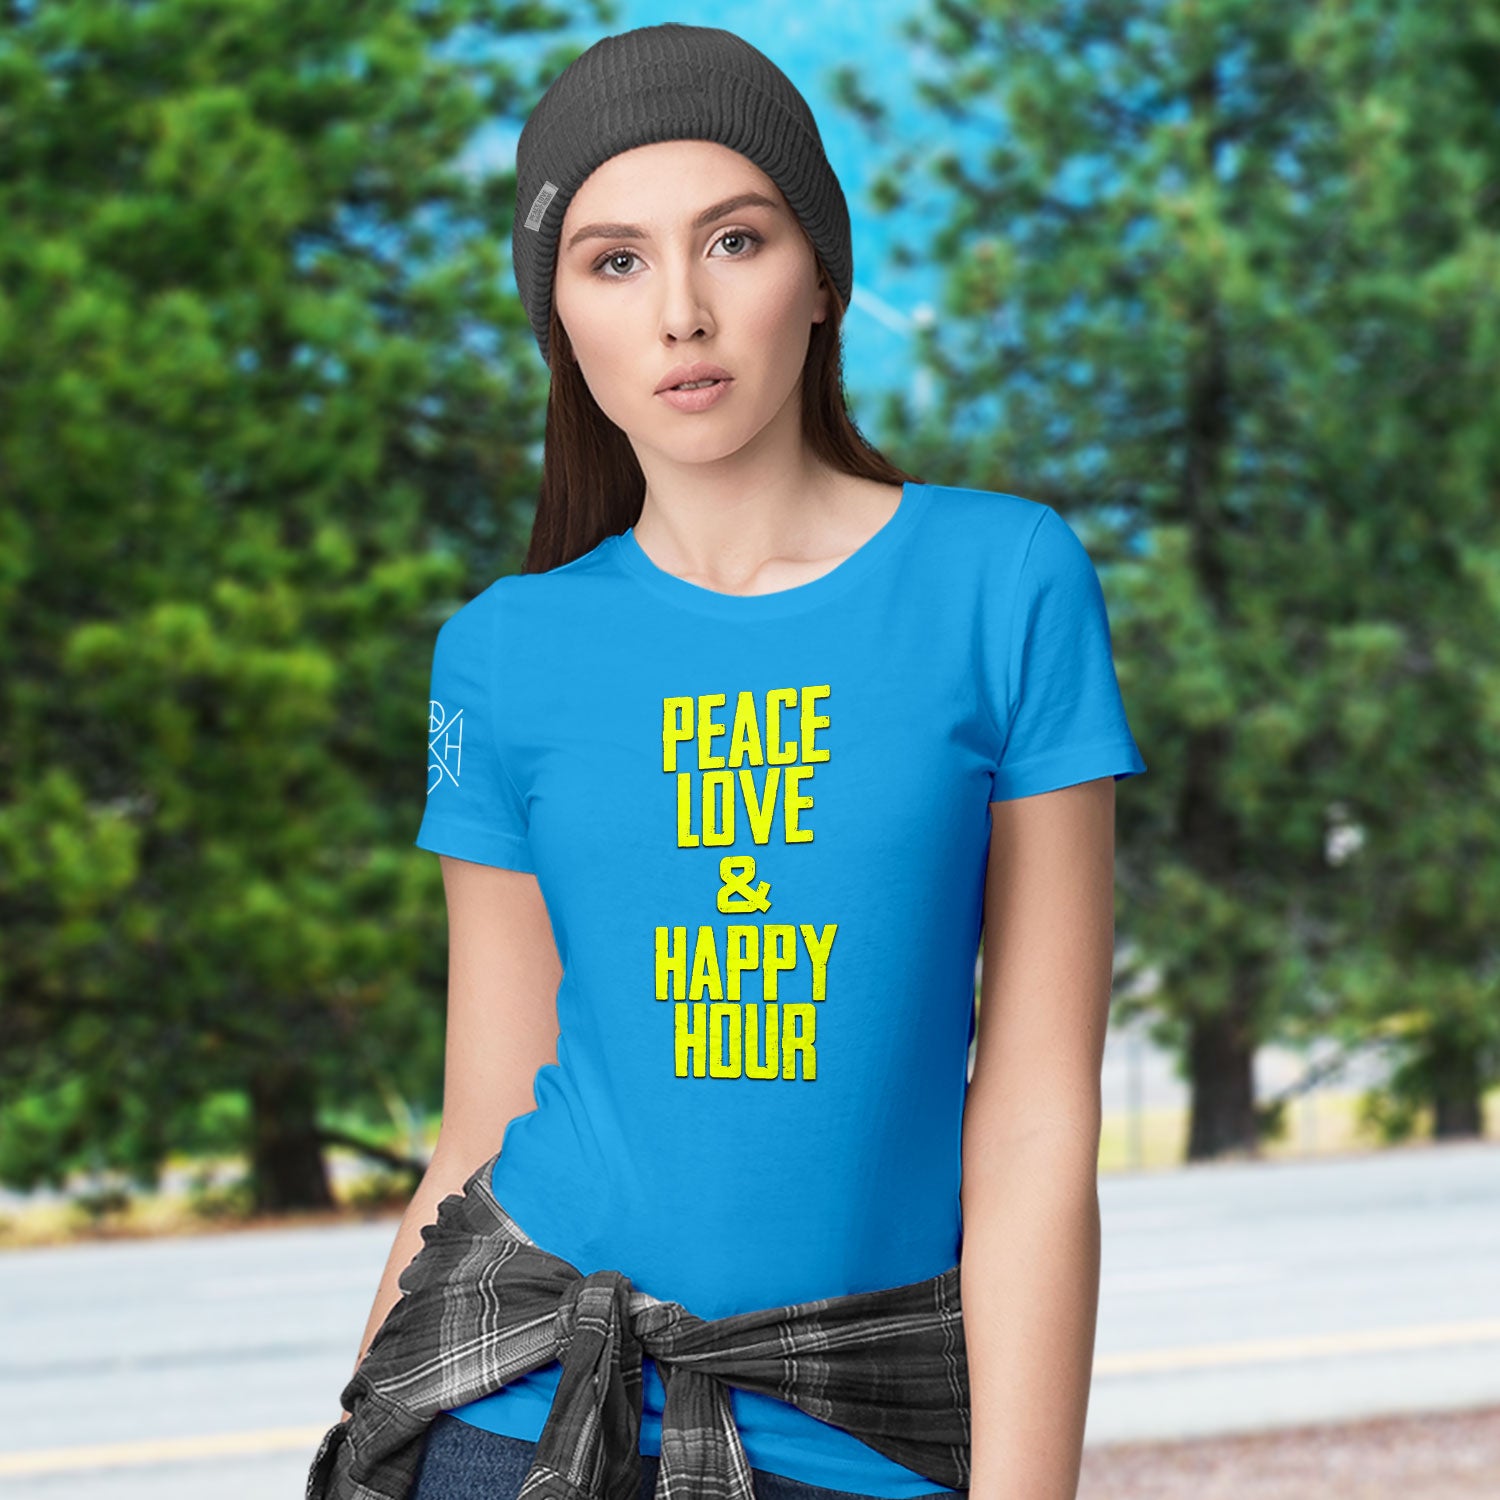 Peace – Vibes T-Shirt Happy Hour Love and Good